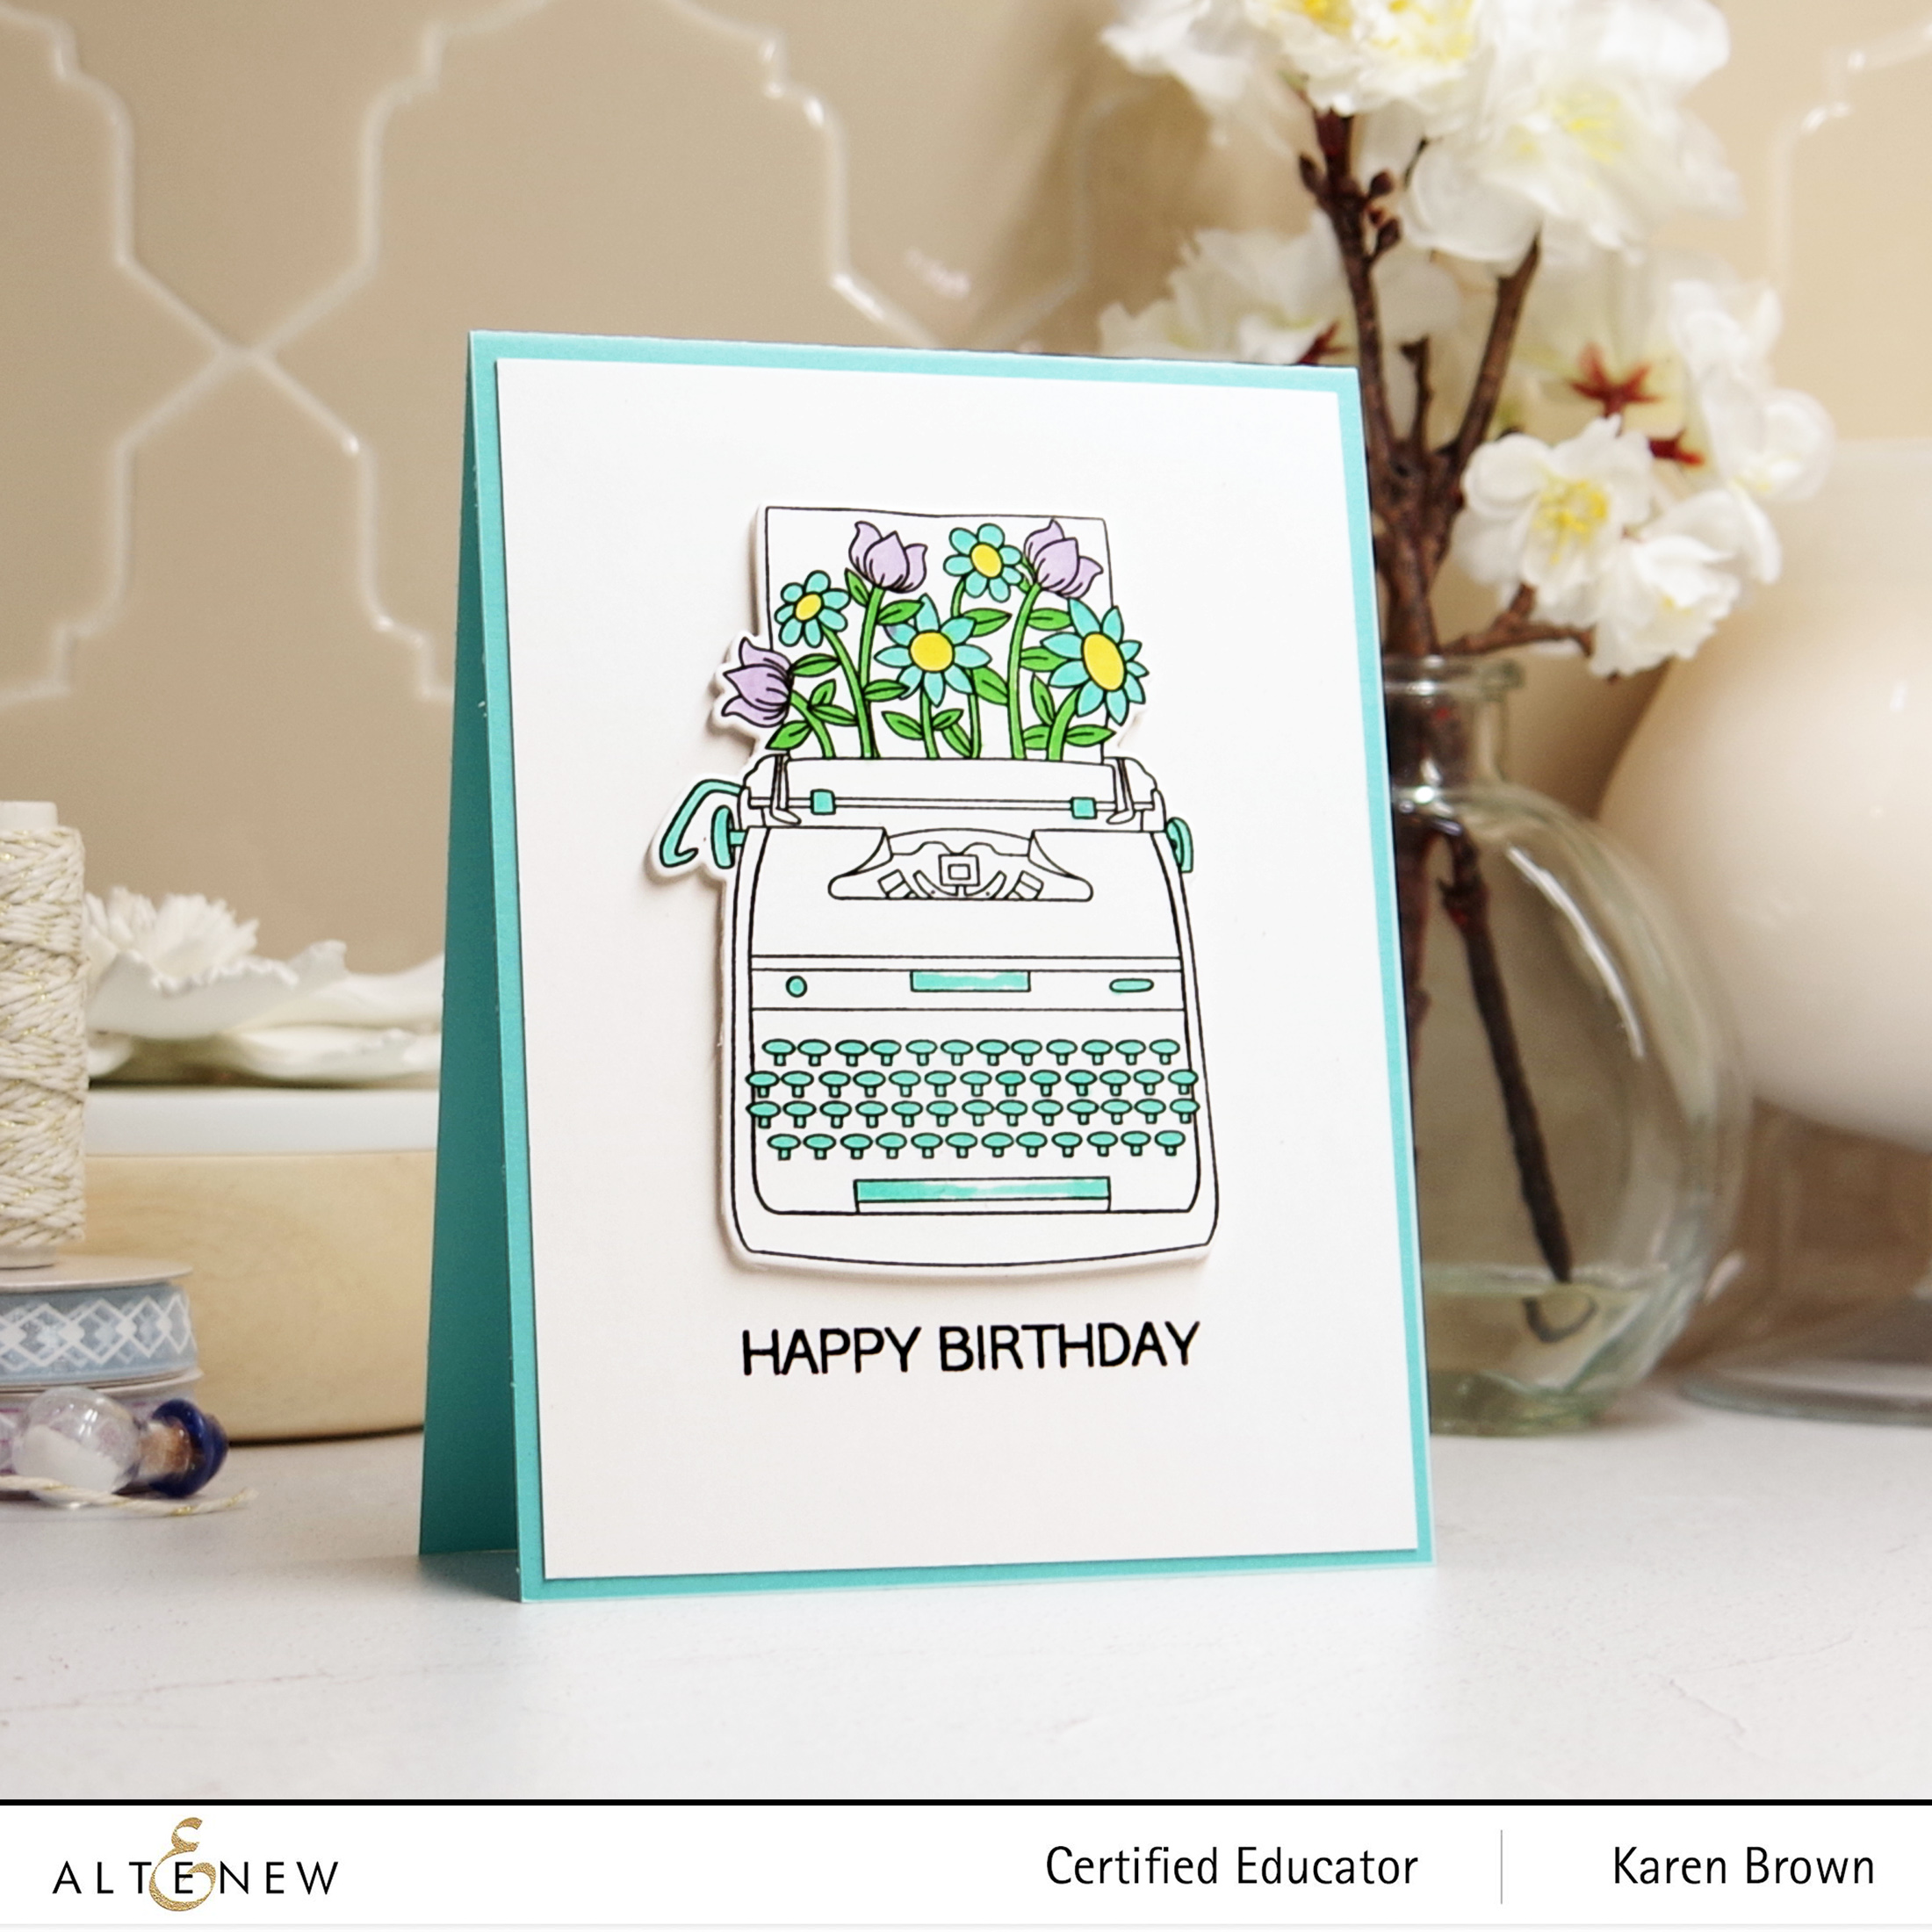 CAS Clean and Simple card using Altenew's Typewriter Flowers mini stamp and die bundle.